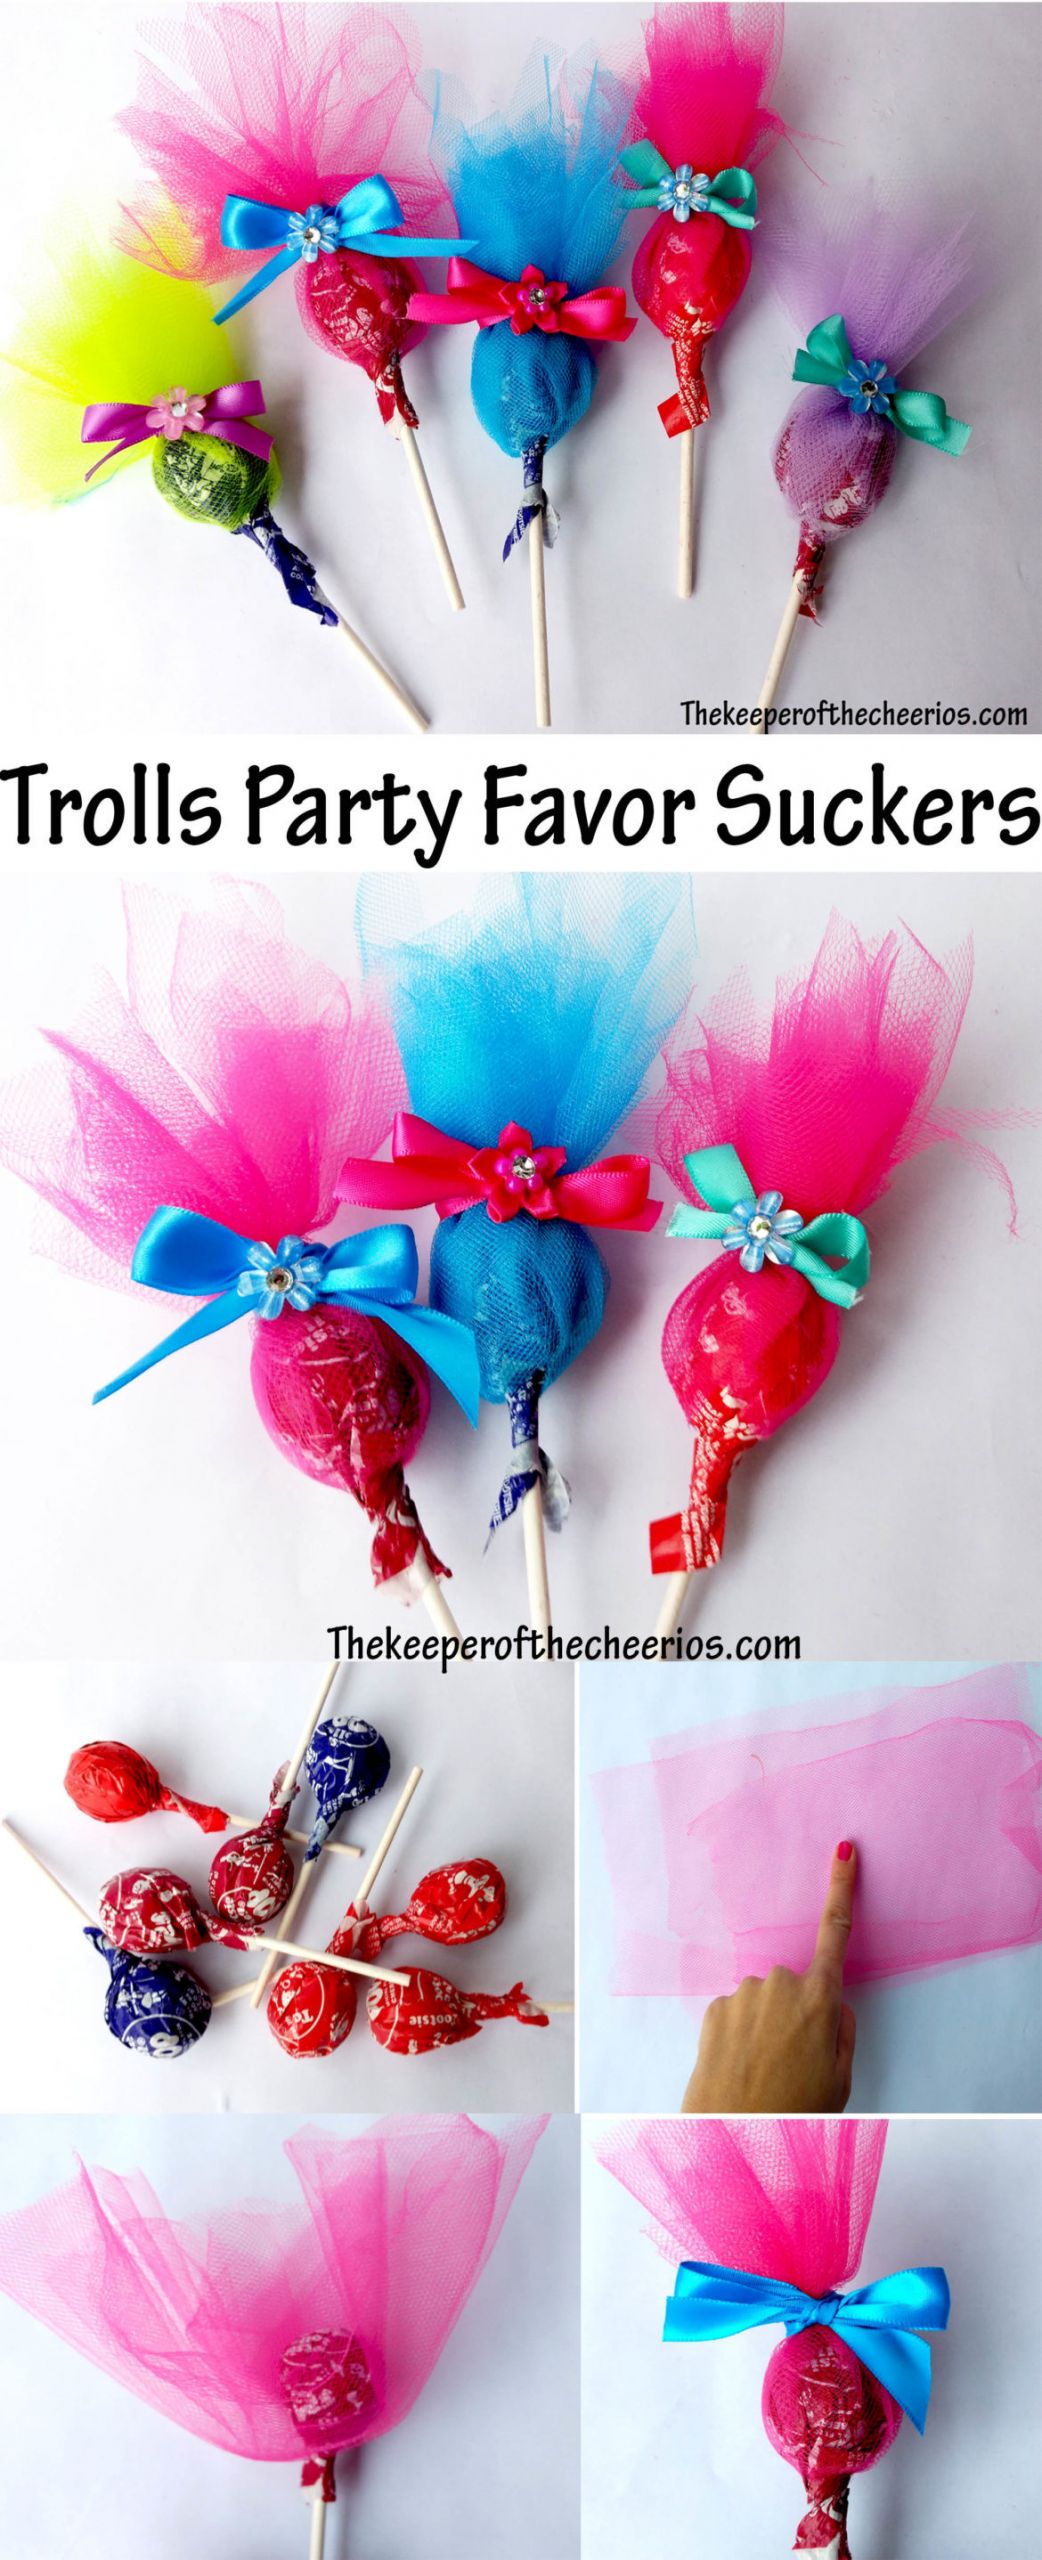 Trolls Diy Party Ideas
 Trolls Party Favor Suckers The Keeper of the Cheerios